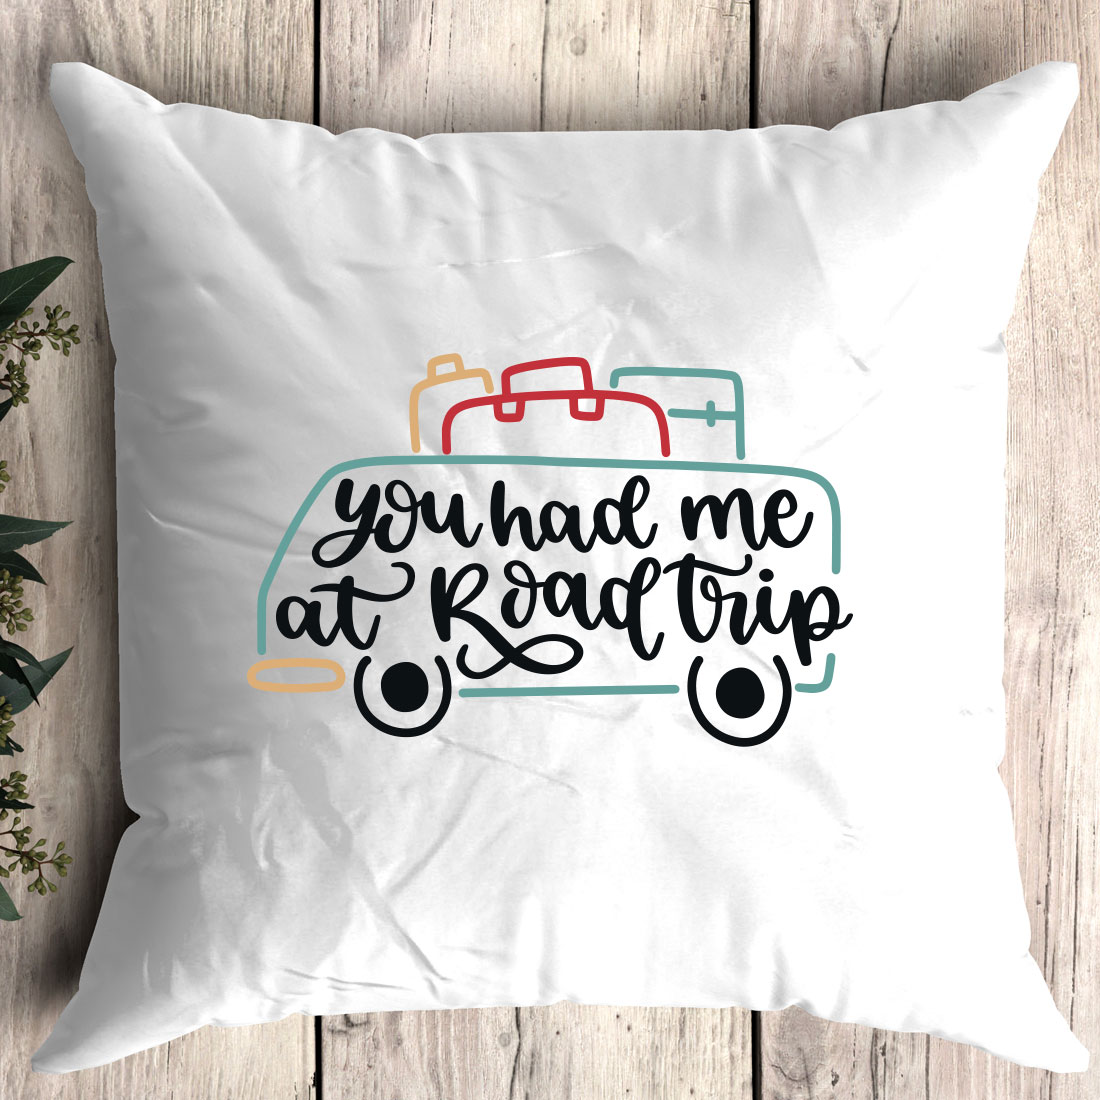 Pillow that says you had me at road trip.